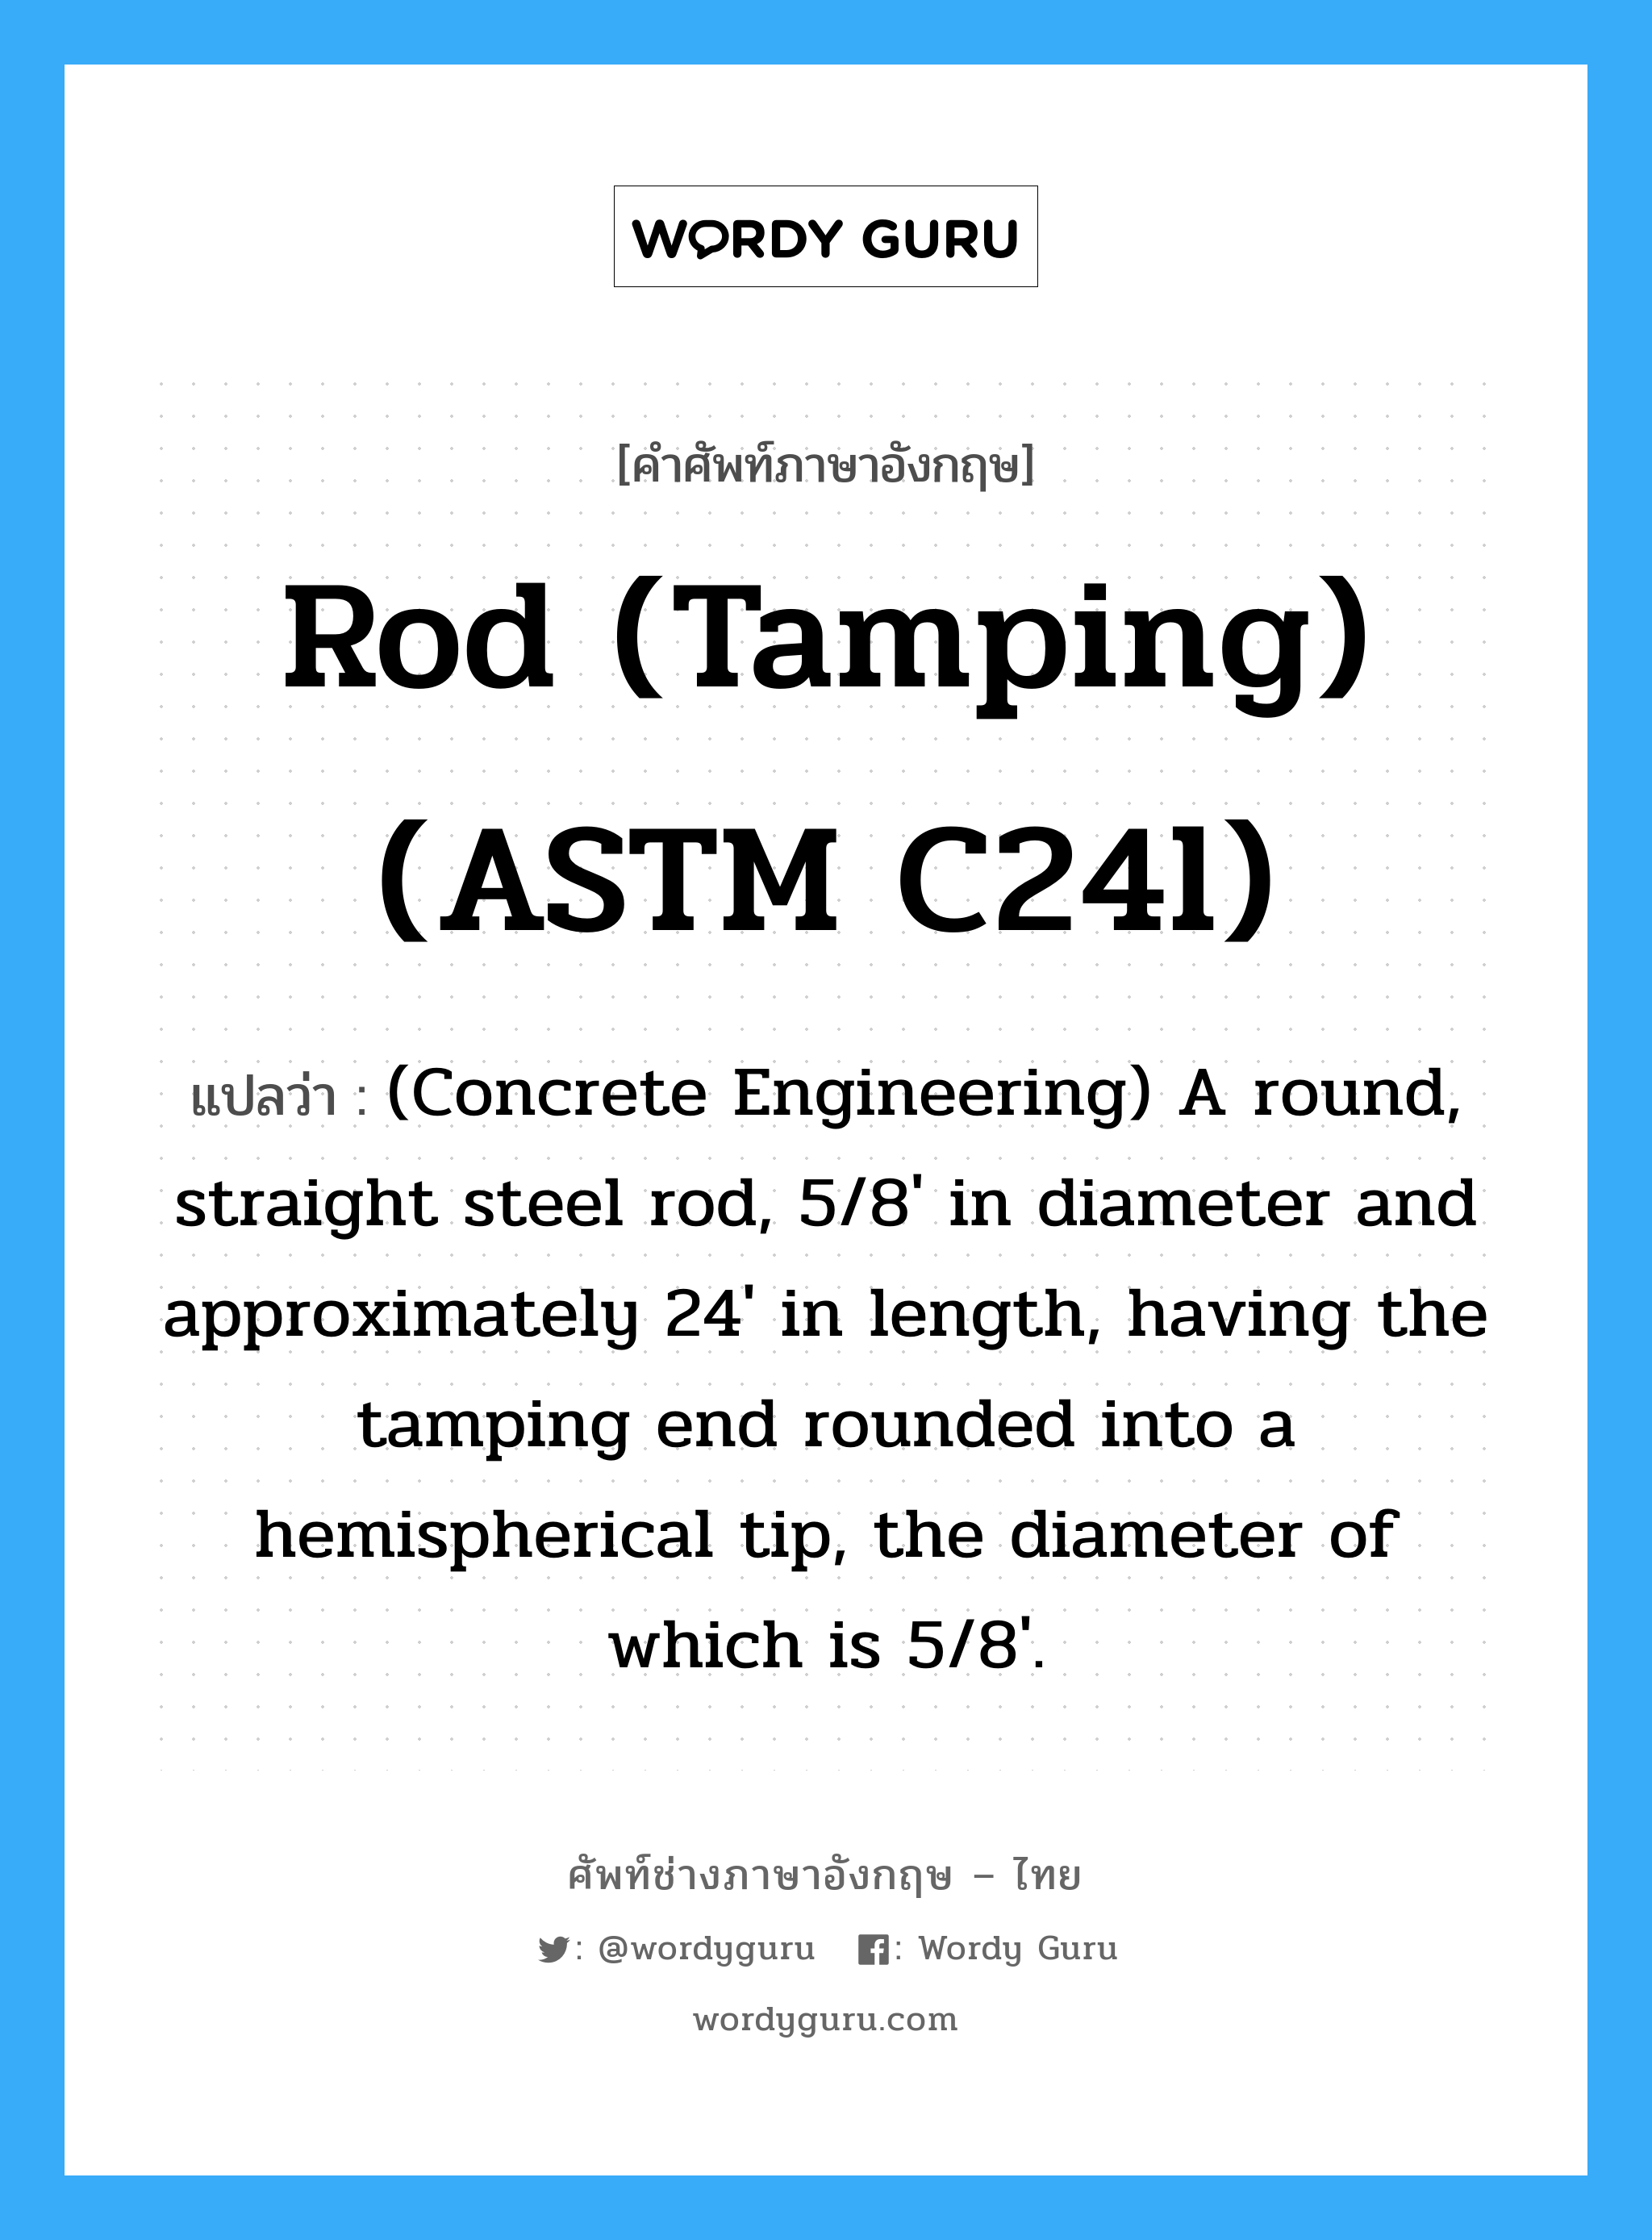 Rod (tamping) (ASTM C24l) แปลว่า?, คำศัพท์ช่างภาษาอังกฤษ - ไทย Rod (tamping) (ASTM C24l) คำศัพท์ภาษาอังกฤษ Rod (tamping) (ASTM C24l) แปลว่า (Concrete Engineering) A round, straight steel rod, 5/8' in diameter and approximately 24' in length, having the tamping end rounded into a hemispherical tip, the diameter of which is 5/8'.